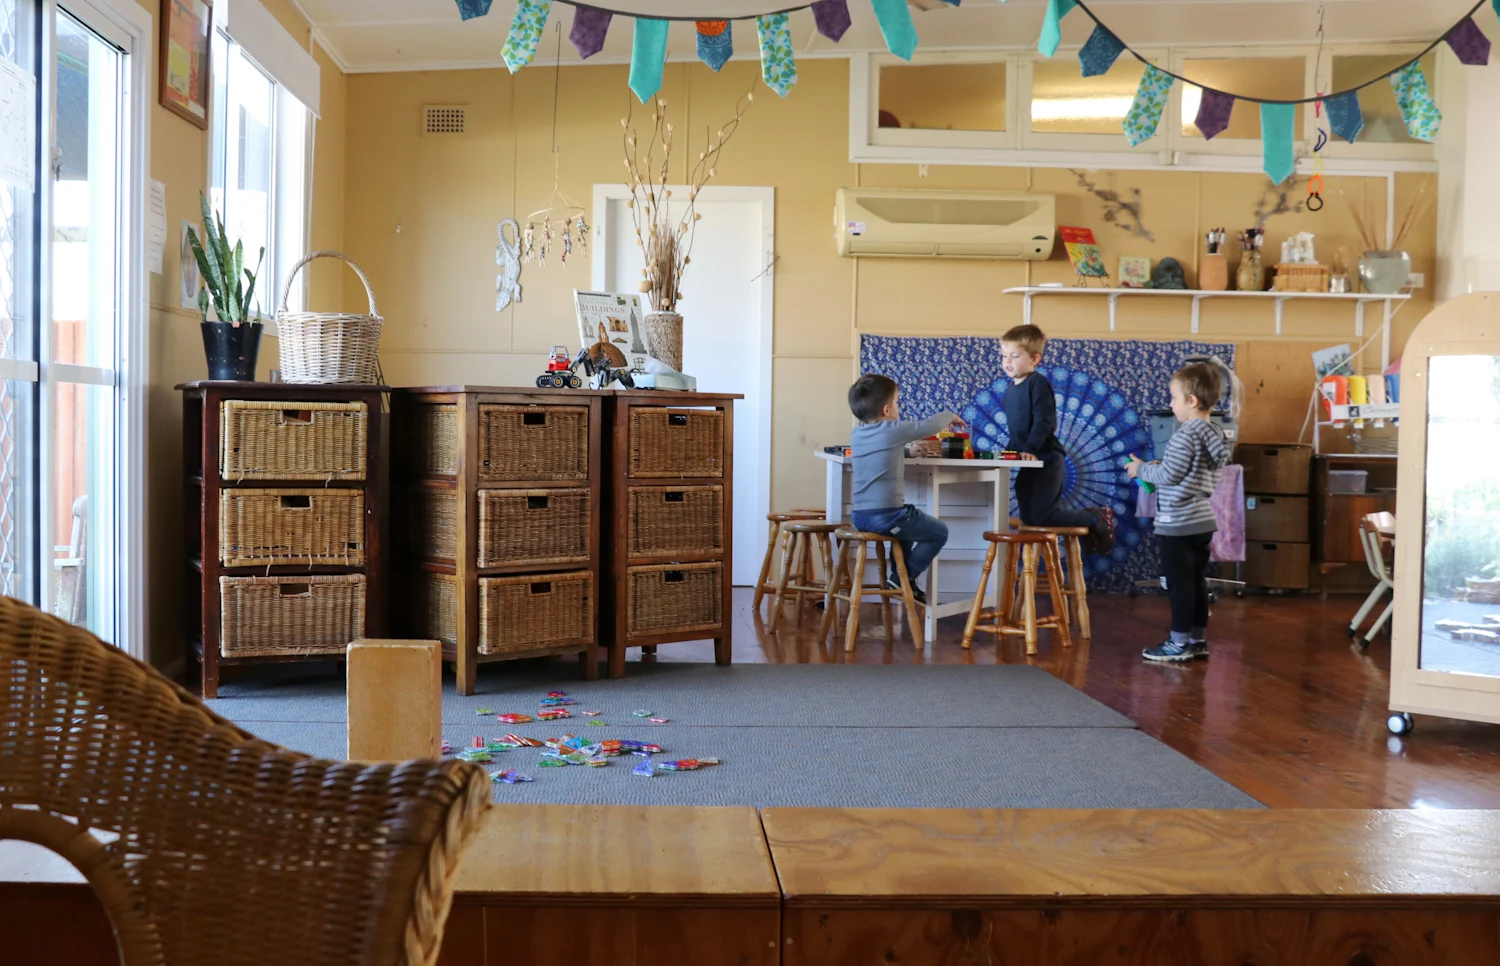 Child care centre in Merewether